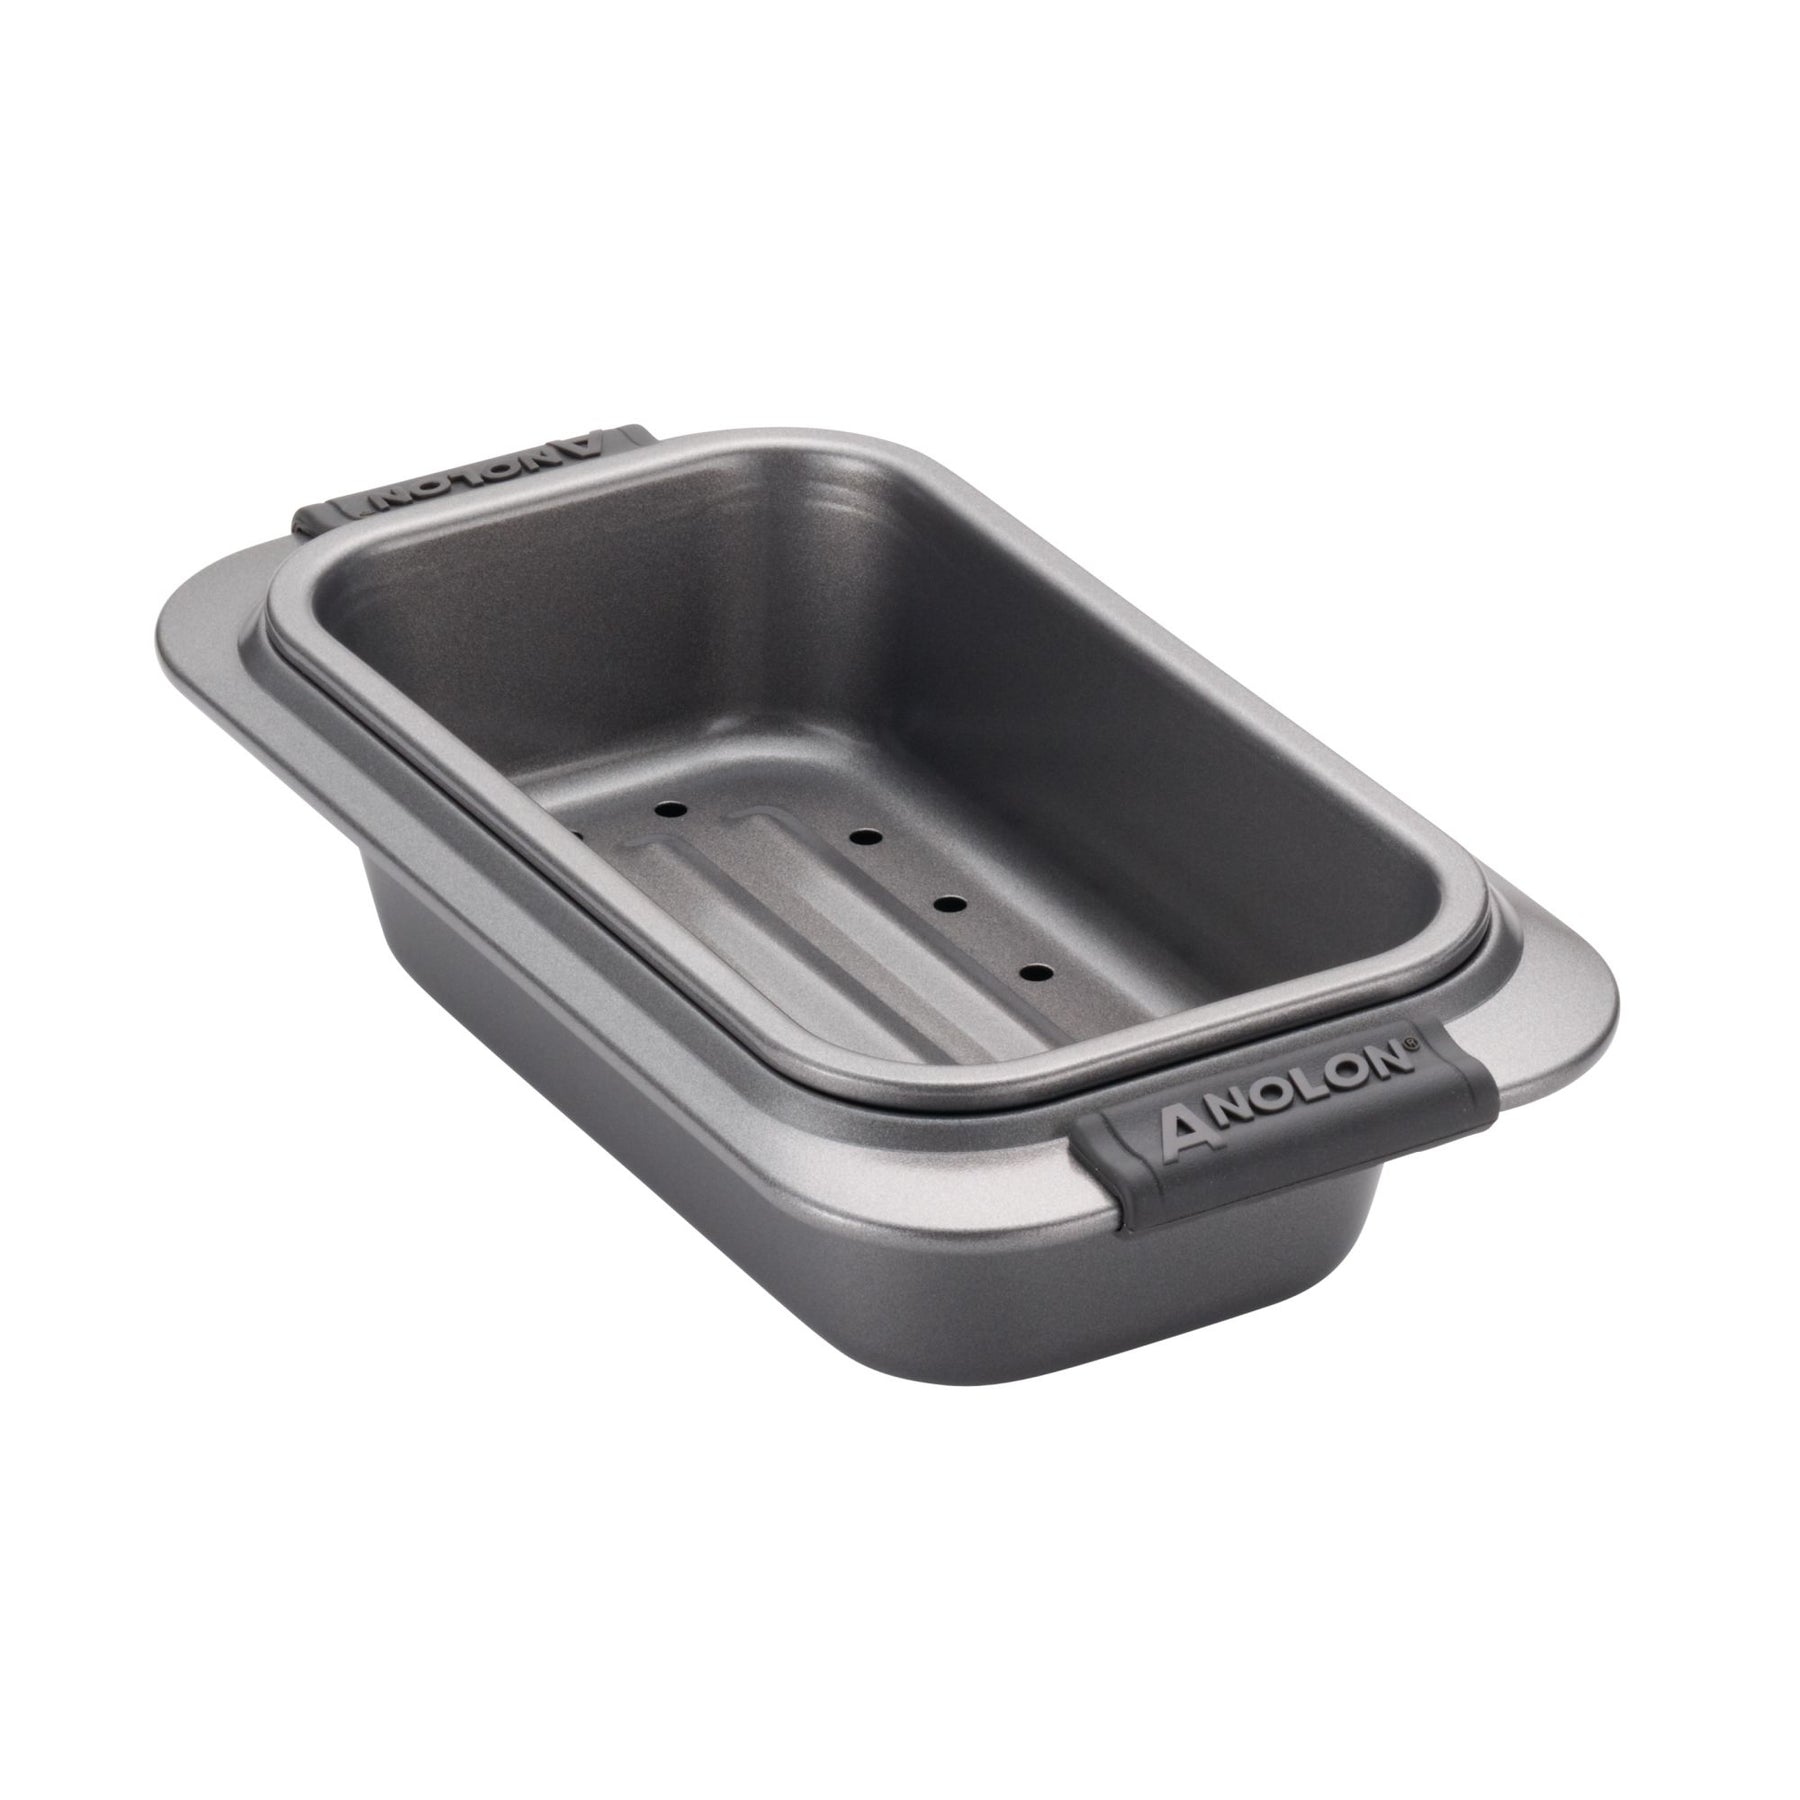 Press Loaf Pan 10.75 inch x 6 inch x 2.6 inch, Ideal for Bread Baking Made with Non-Stick Coating for Home Kitchen and Catering. Bakeware Line, Gray